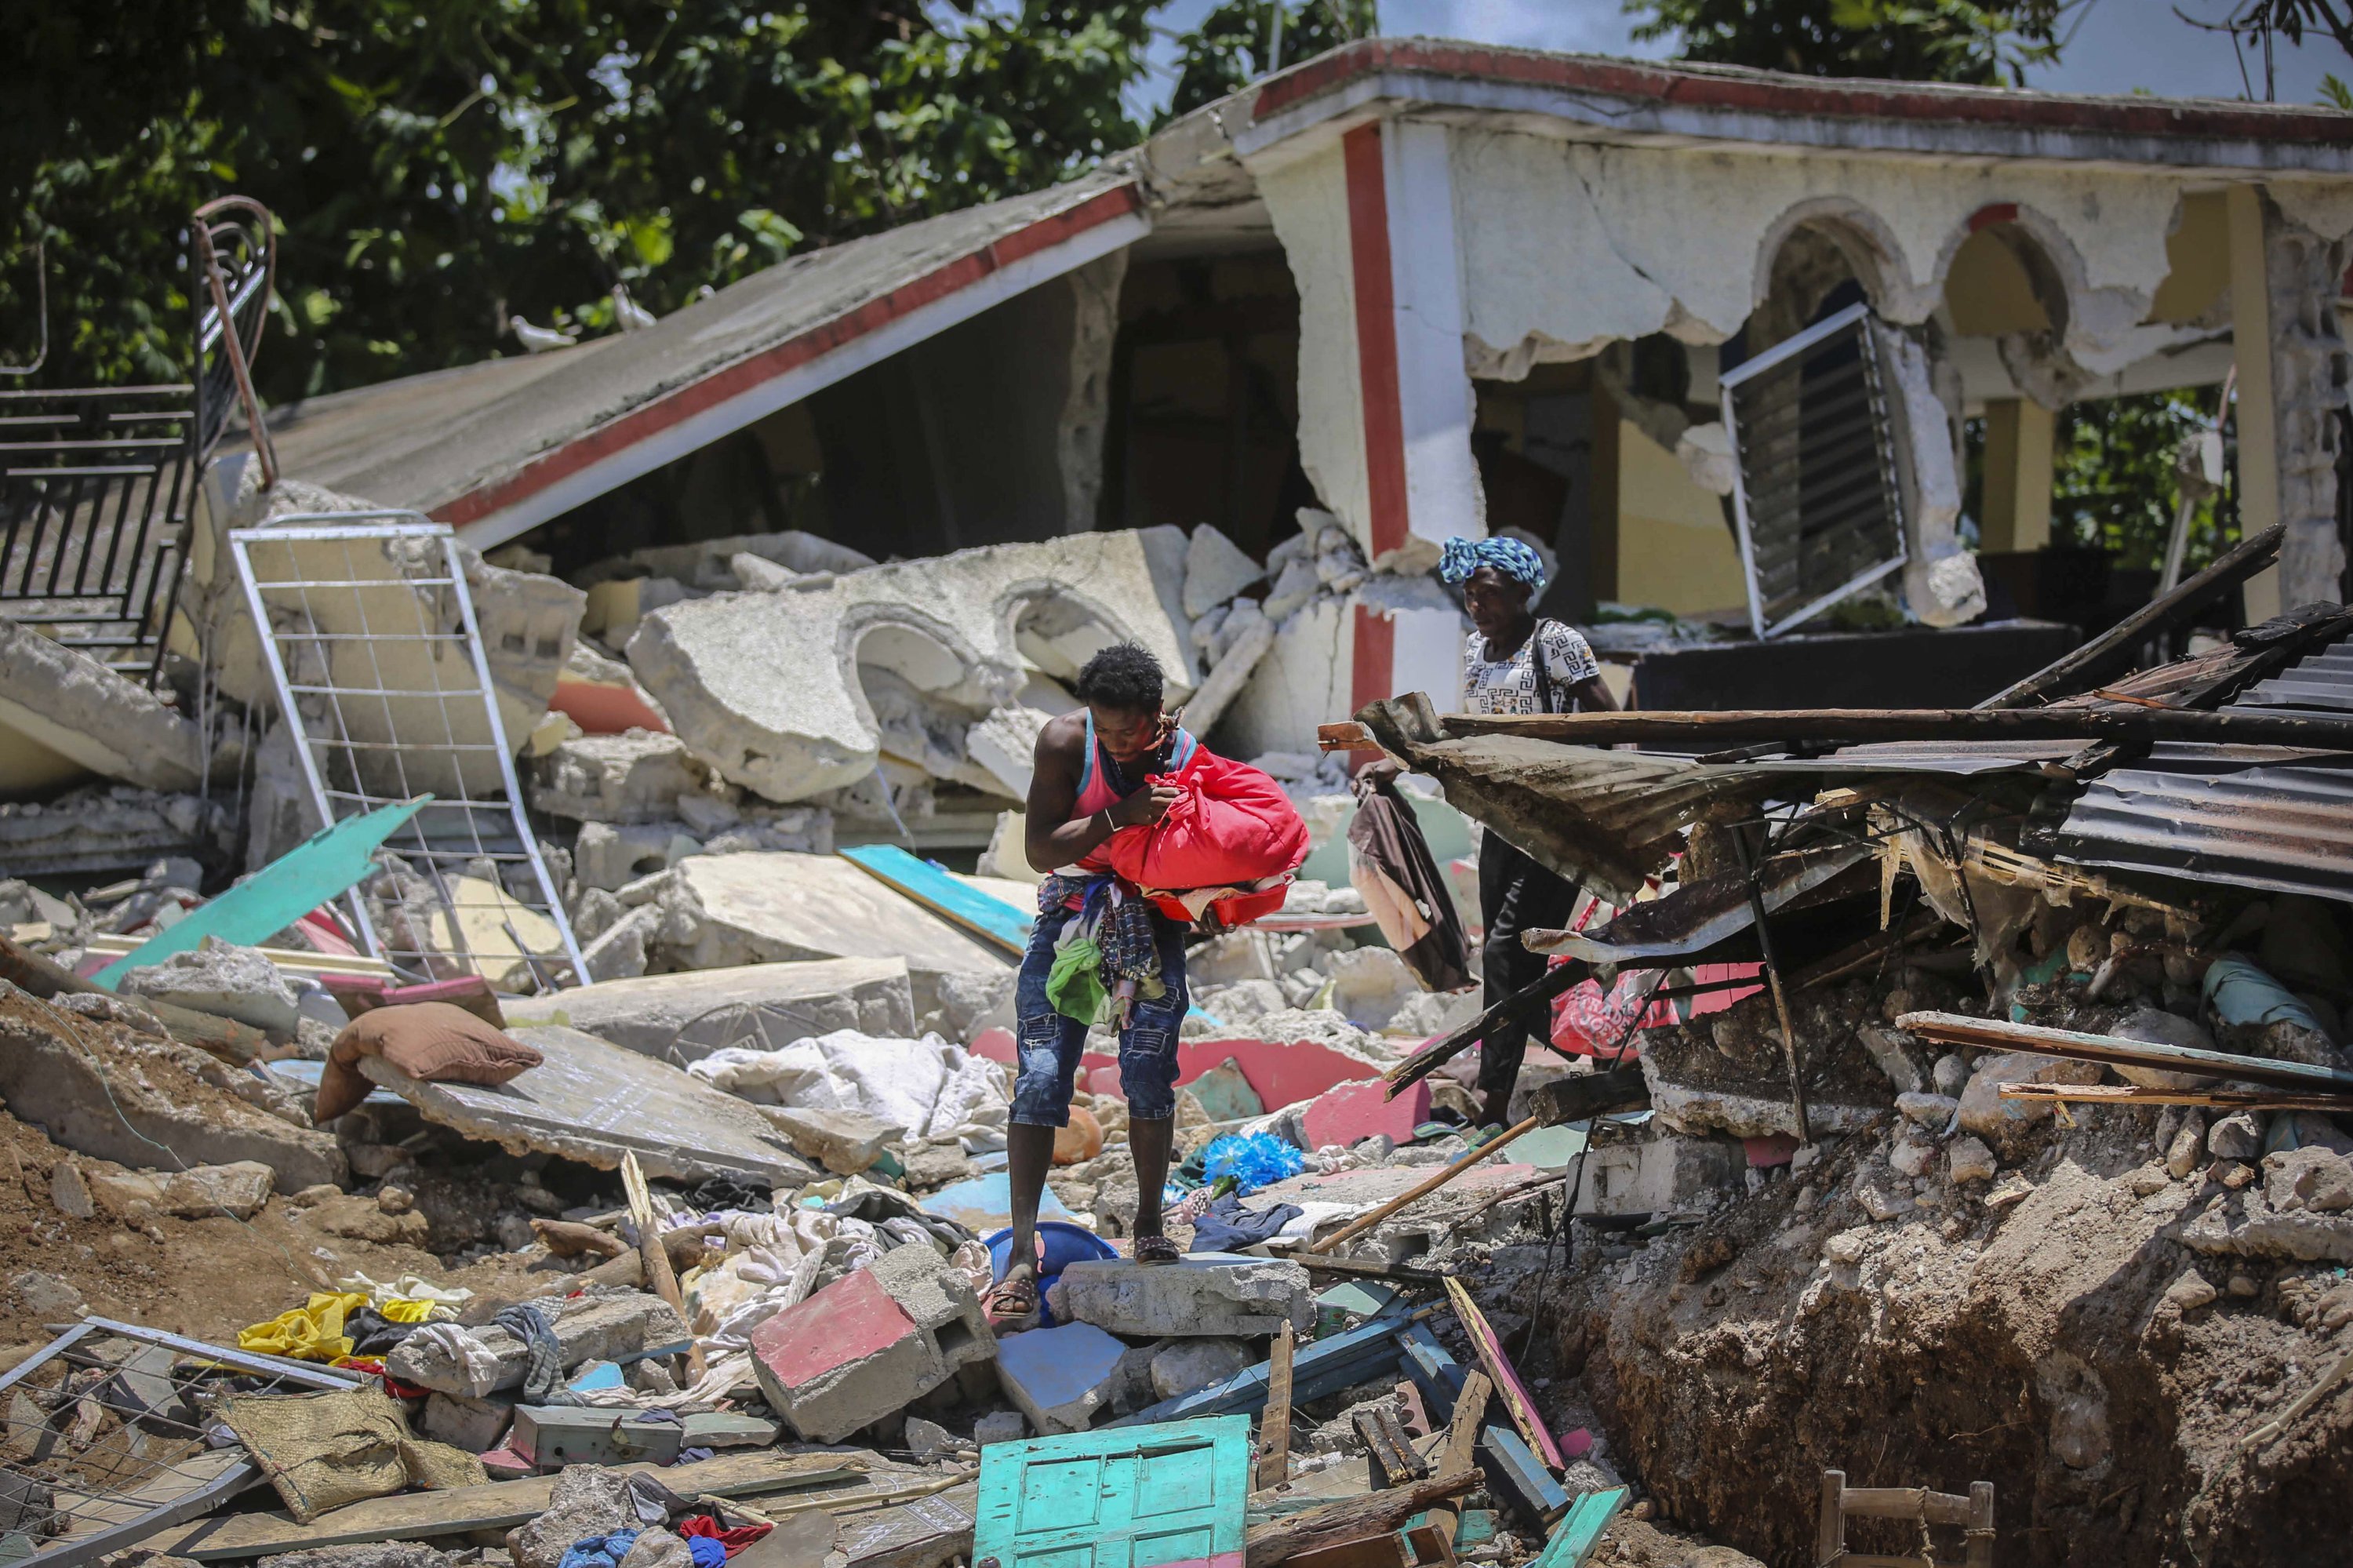 Locals recover their belongings from their homes destroyed in the earthquake in Camp-Perrin, Les Cayes, Haiti, Aug. 15, 2021. (AP Photo)